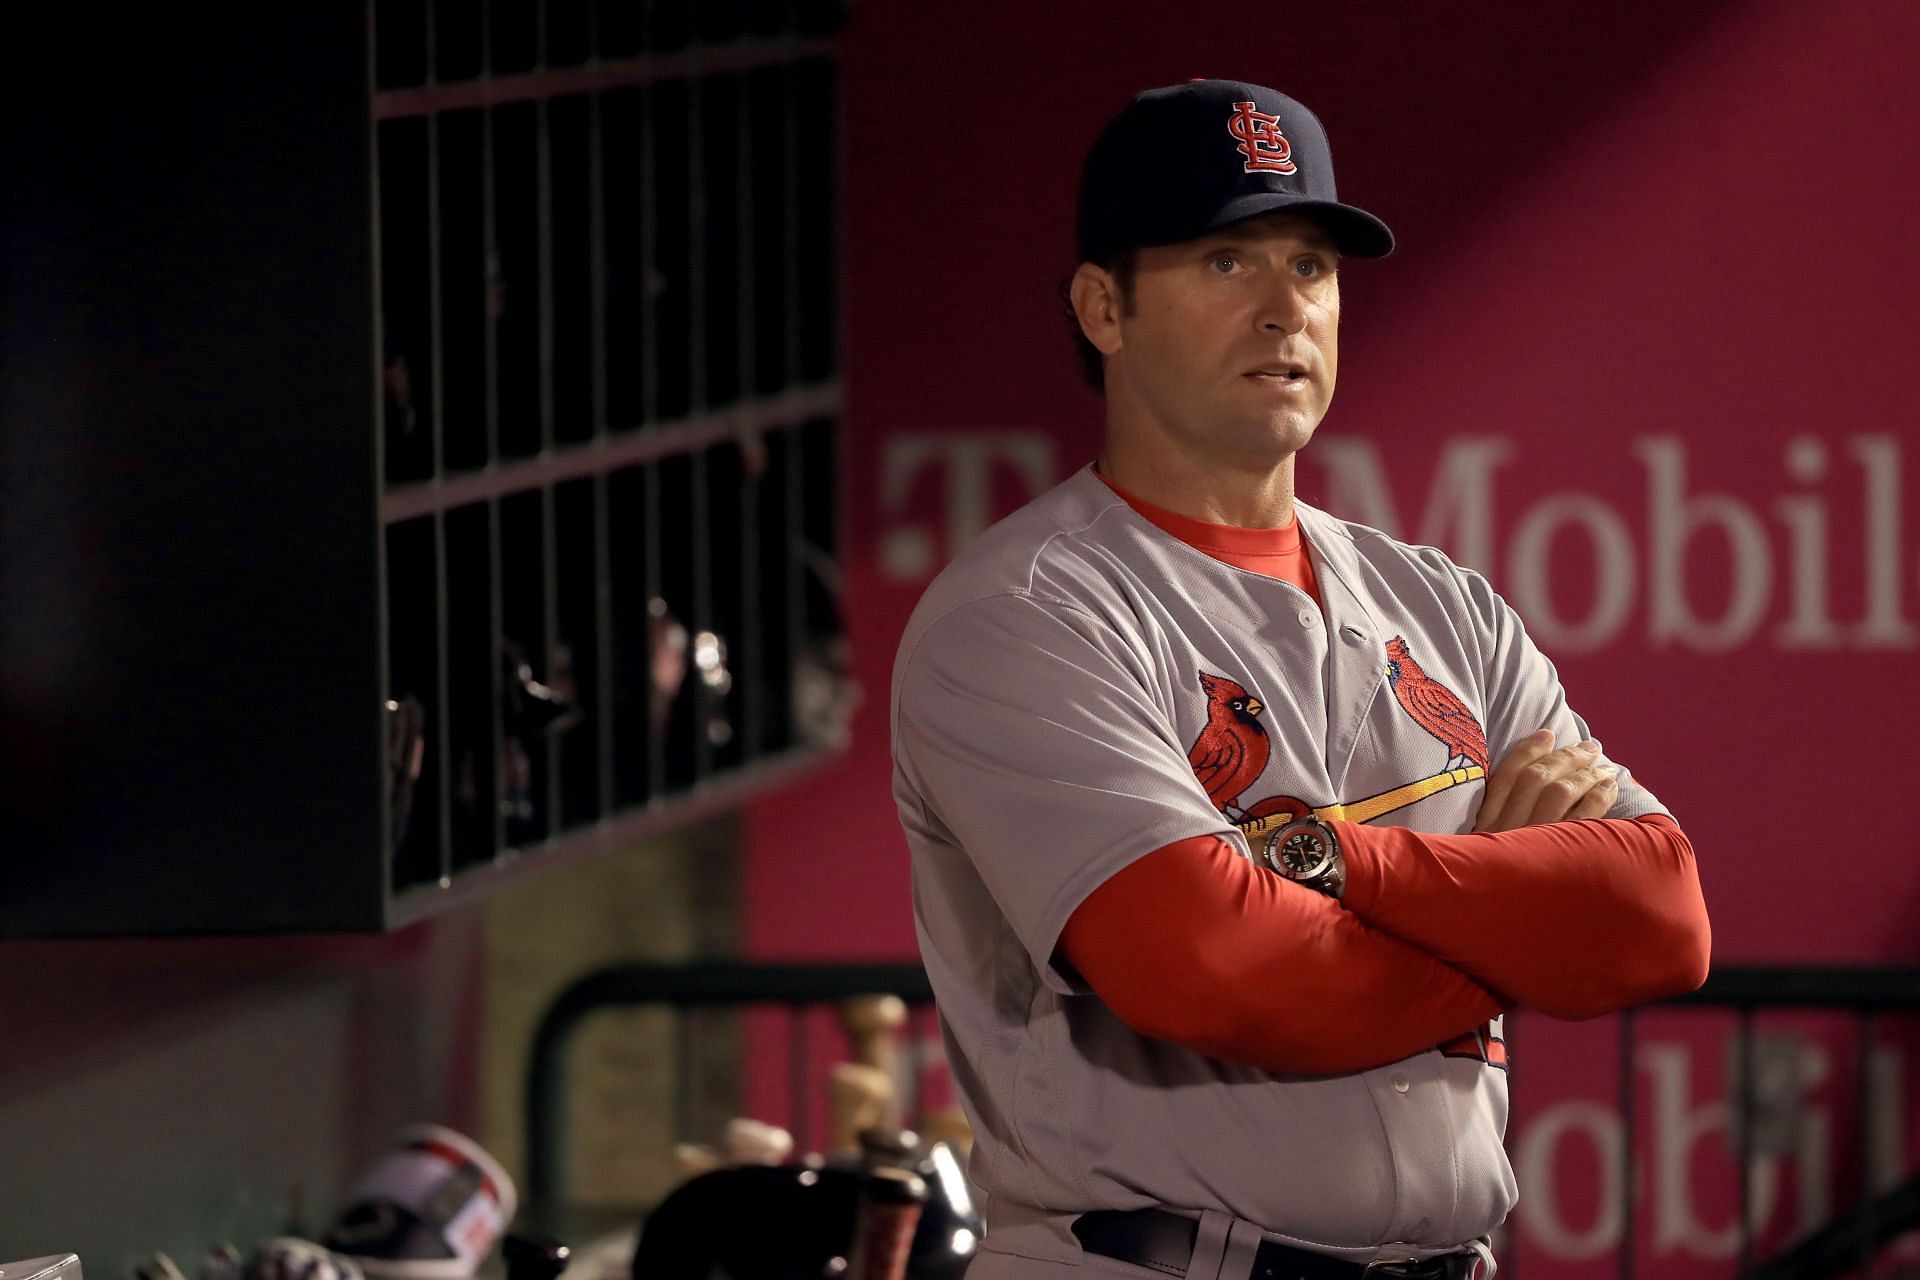 Mike Matheny played for the St. Louis Cardinals and the San Francisco Giants